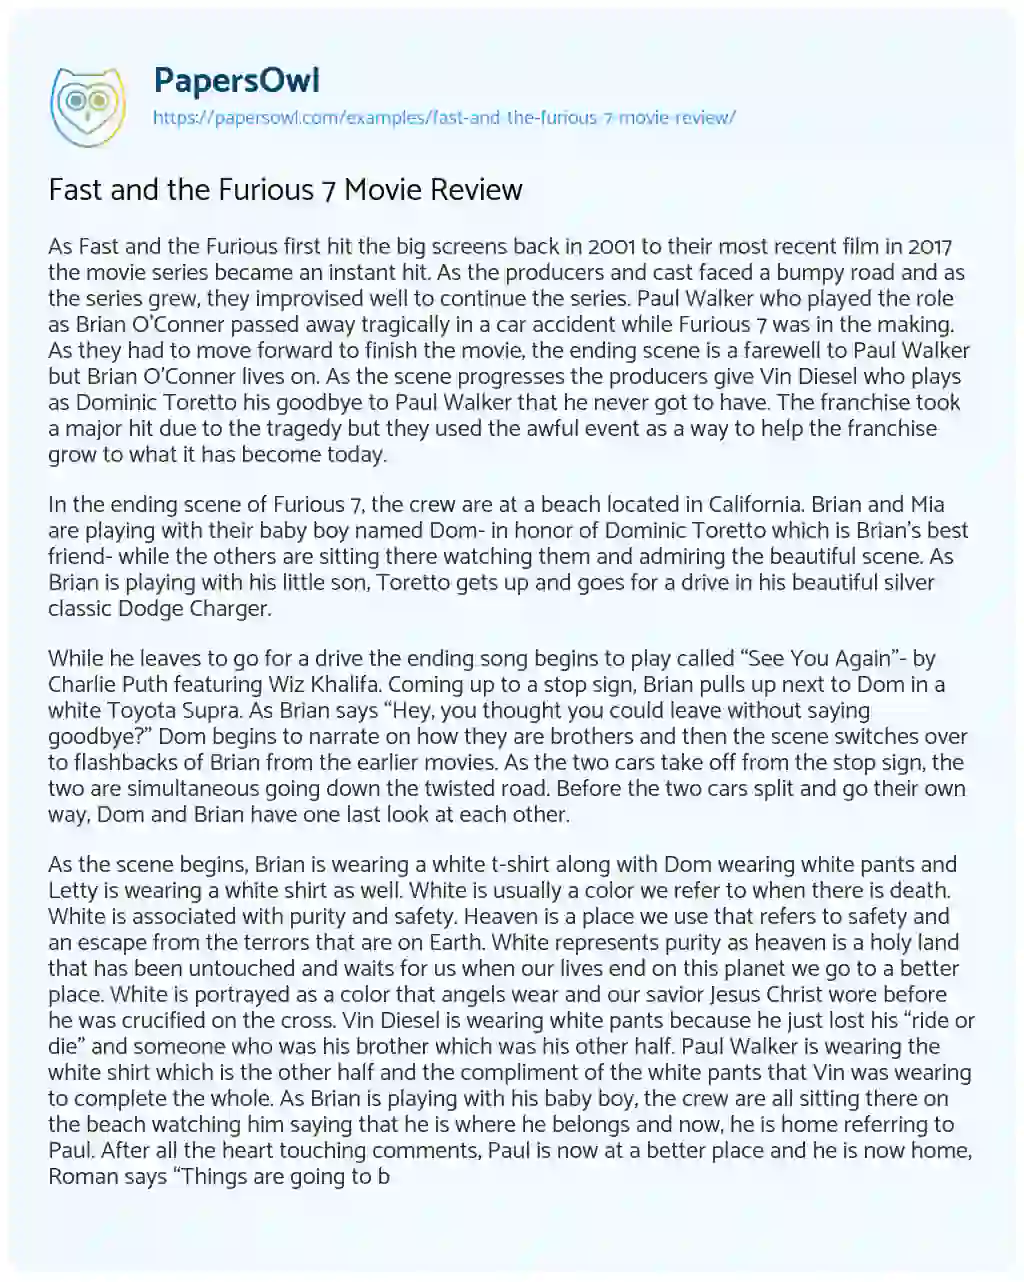 Fast and the Furious 7 Movie Review essay